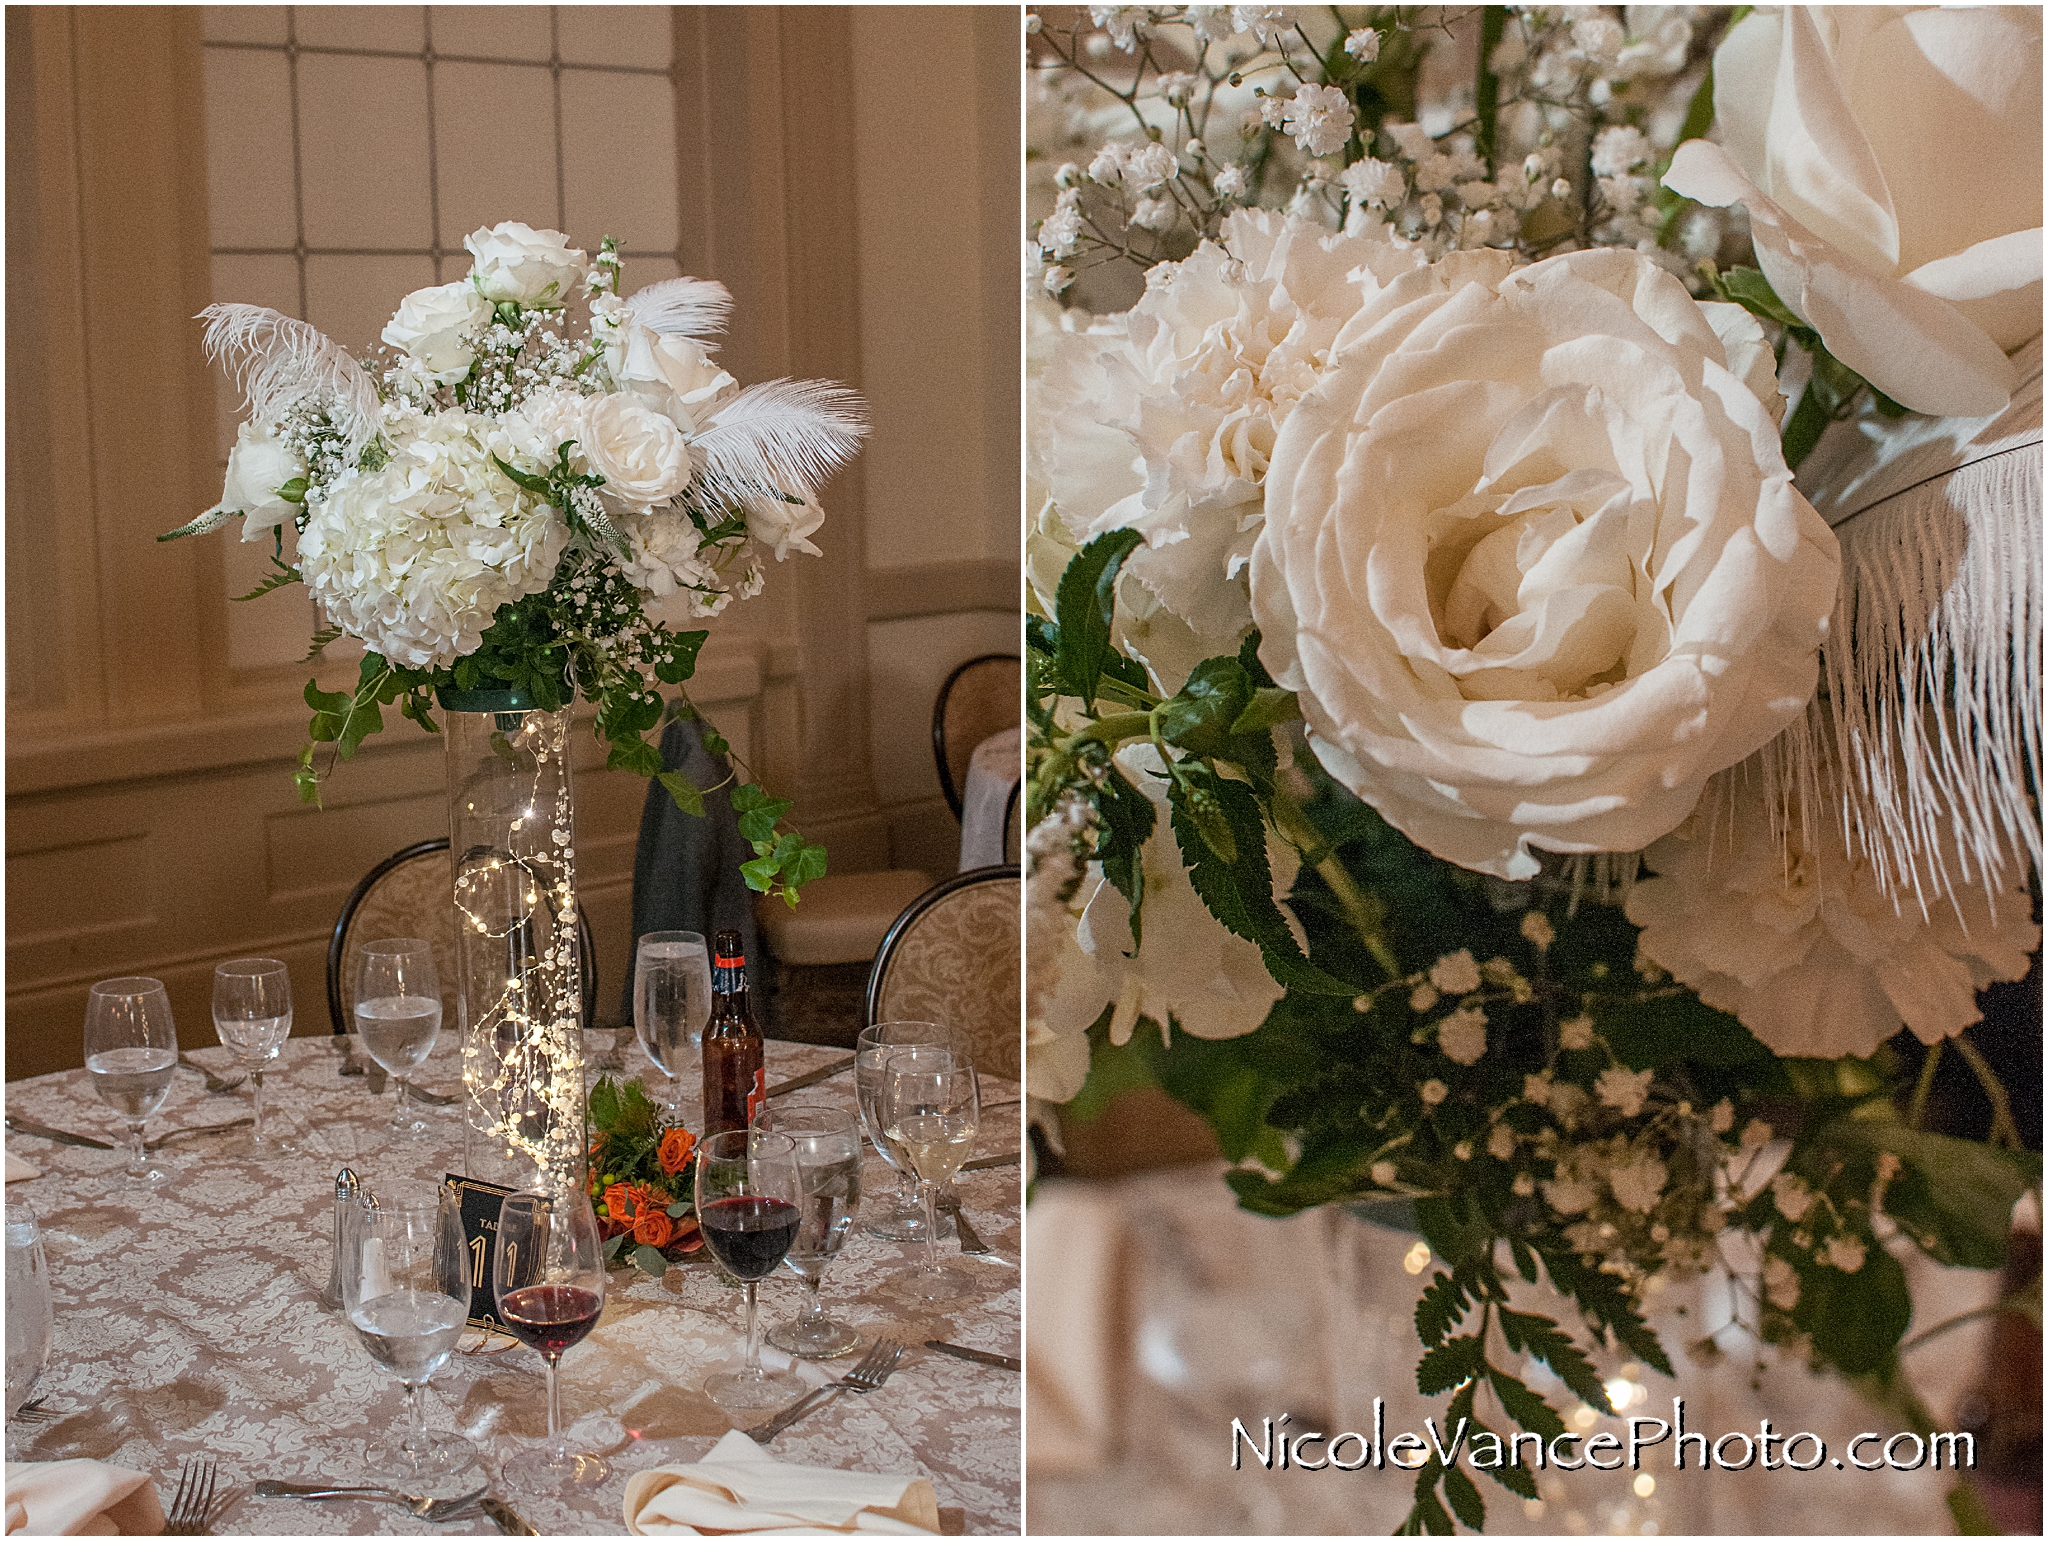 These centerpieces at the Hotel John Marshall ballroom were created by the bride and her family.